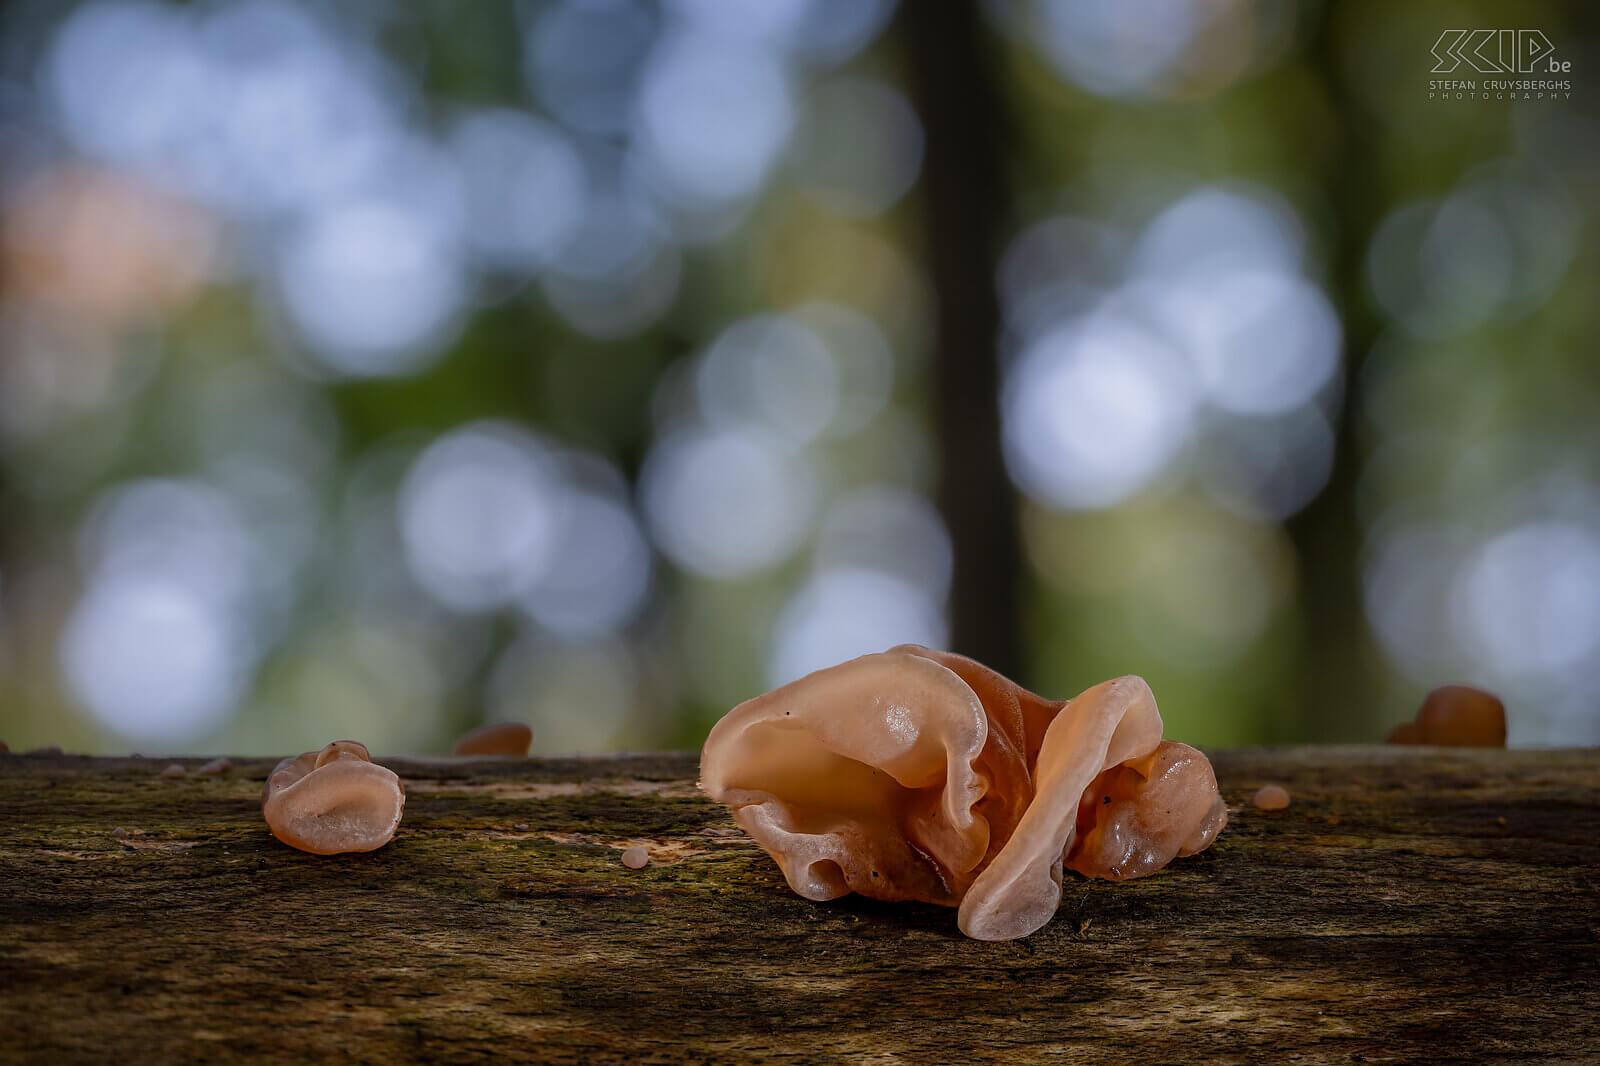 Mushrooms - Jelly ear This autumn many beautiful mushrooms and fungi appear again in our forests and gardens Stefan Cruysberghs